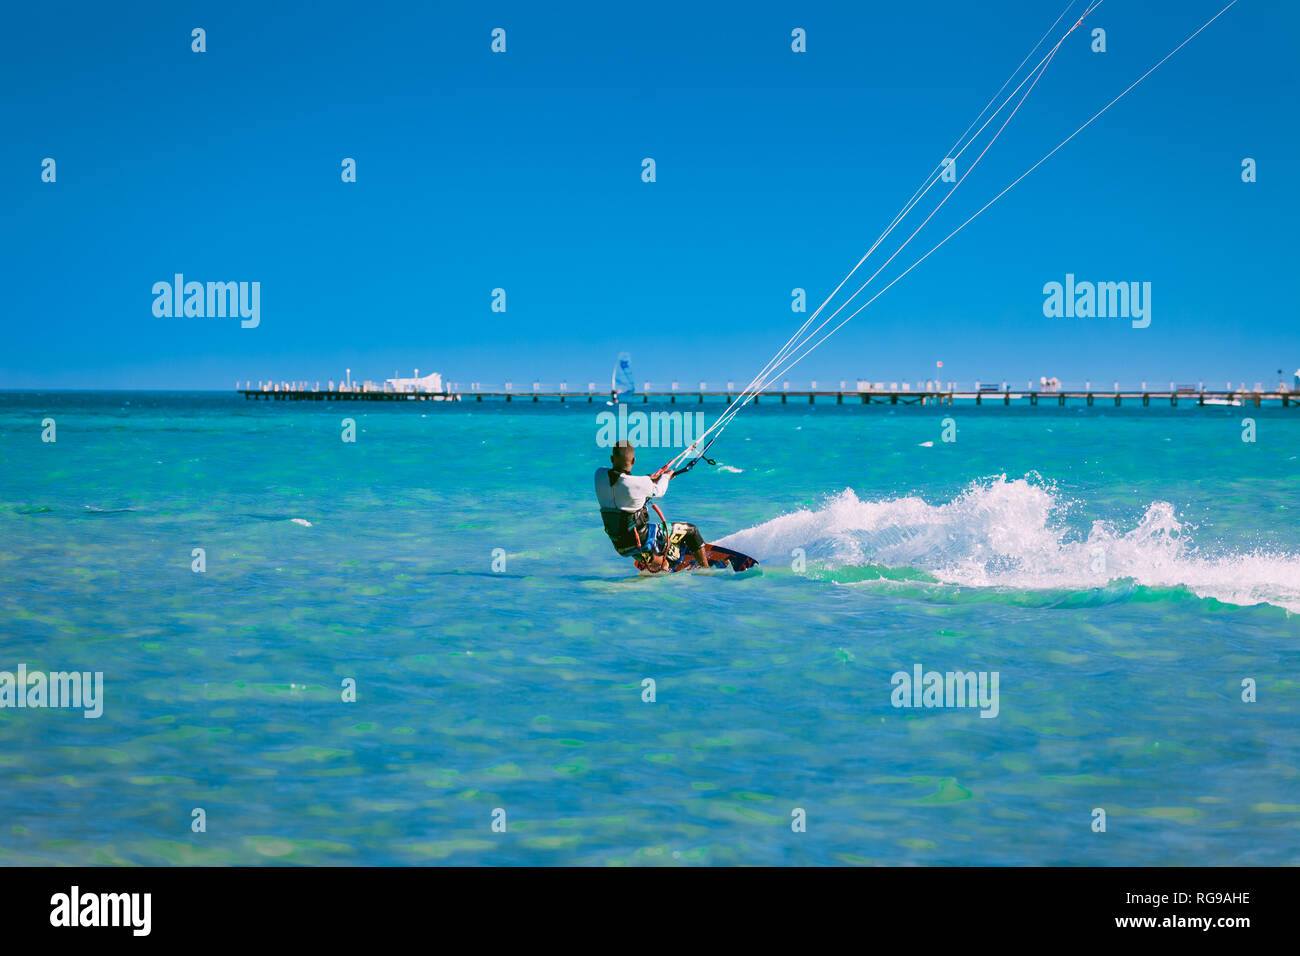 Egypt, Hurghada - 30 November, 2017: The kiter gliding over the Red sea waves. The back side. Breathtaking transparent turquoise water under the clear Stock Photo